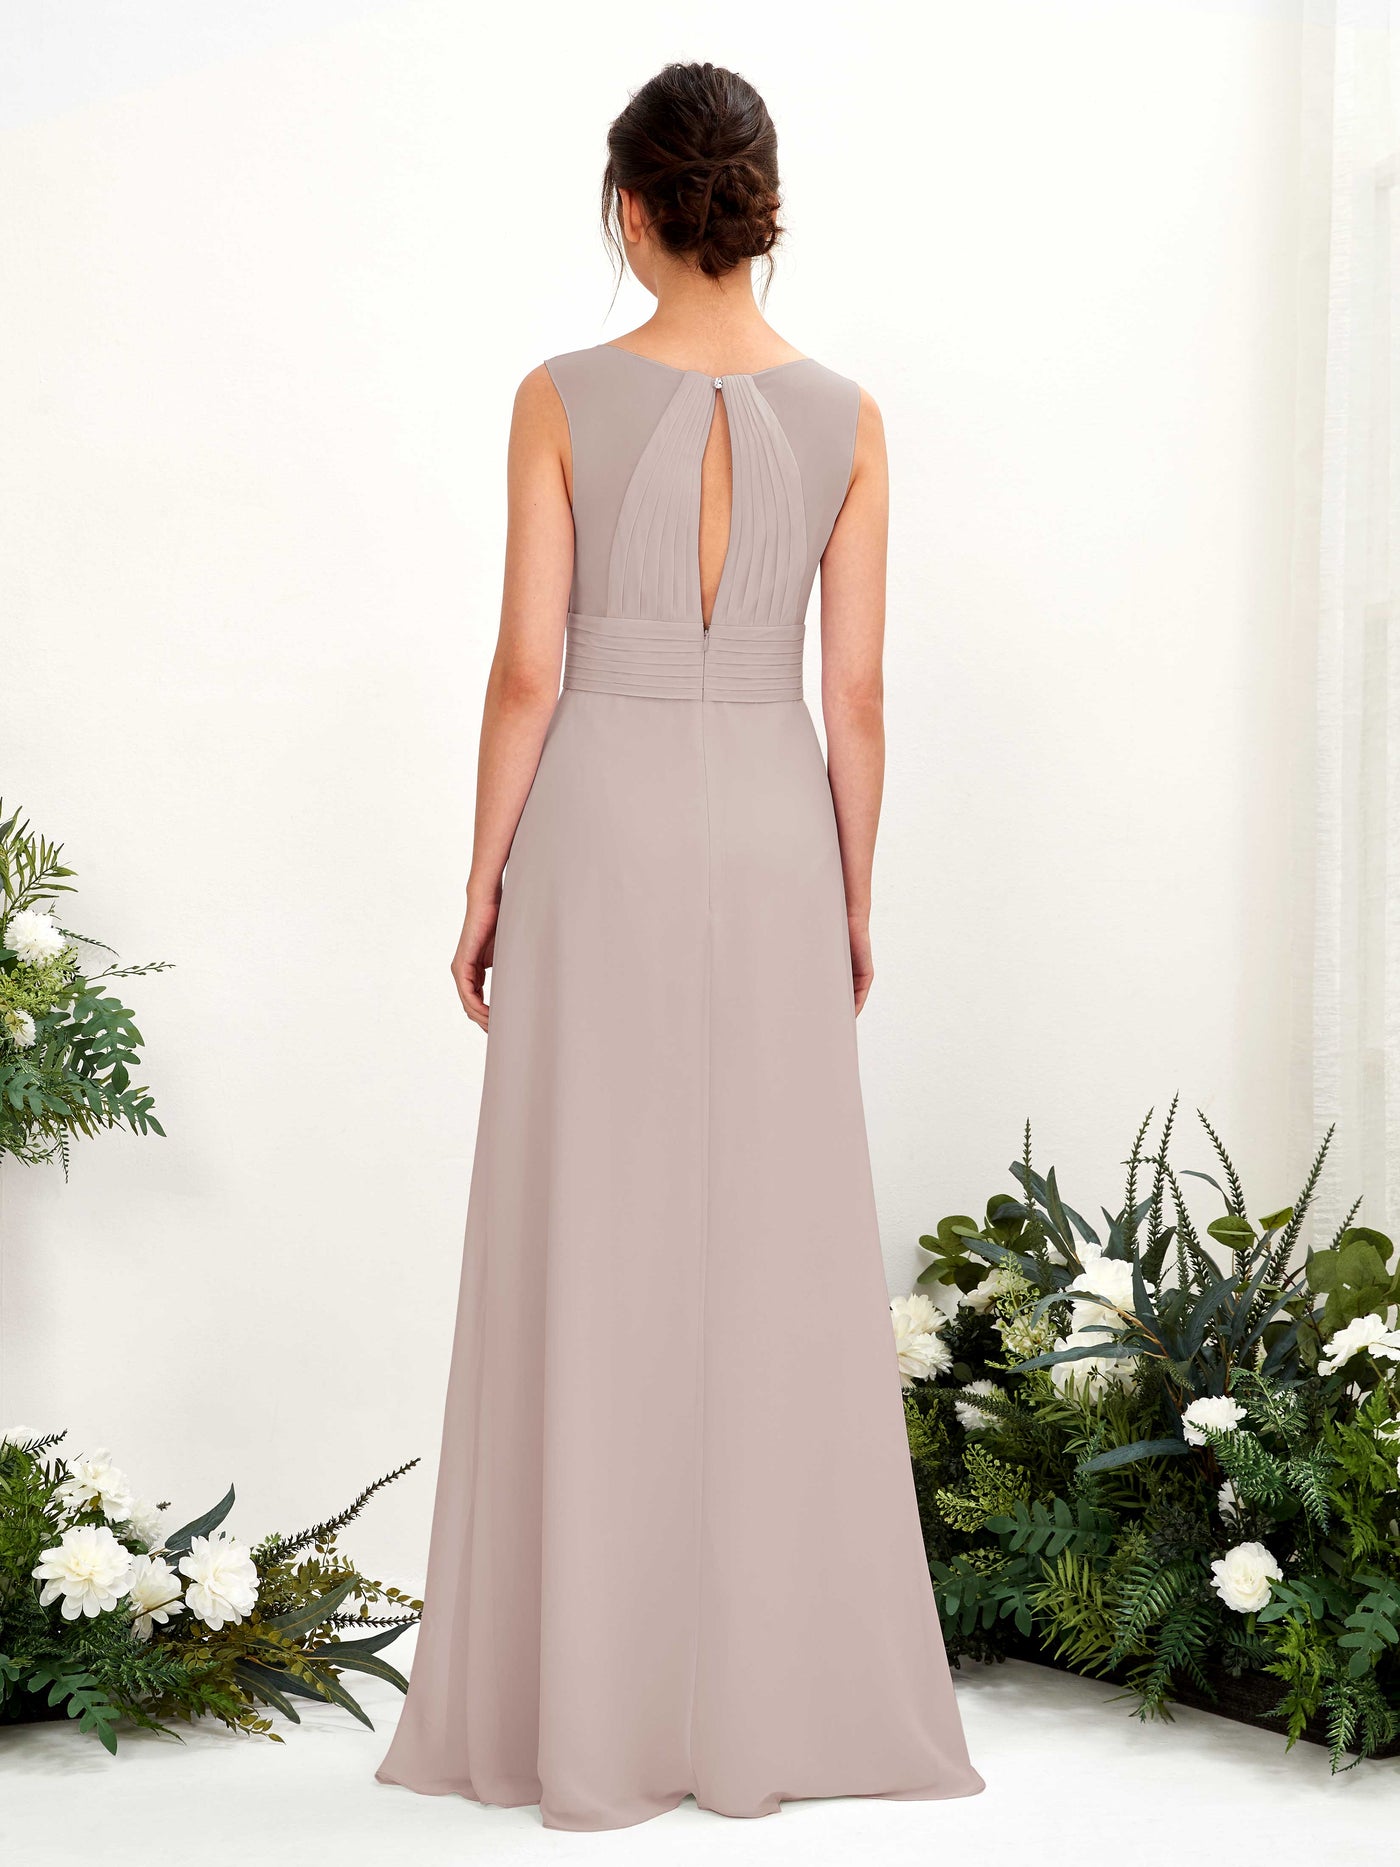 Taupe Bridesmaid Dresses Bridesmaid Dress A-line Chiffon Straps Full Length Sleeveless Wedding Party Dress (81220924)#color_taupe